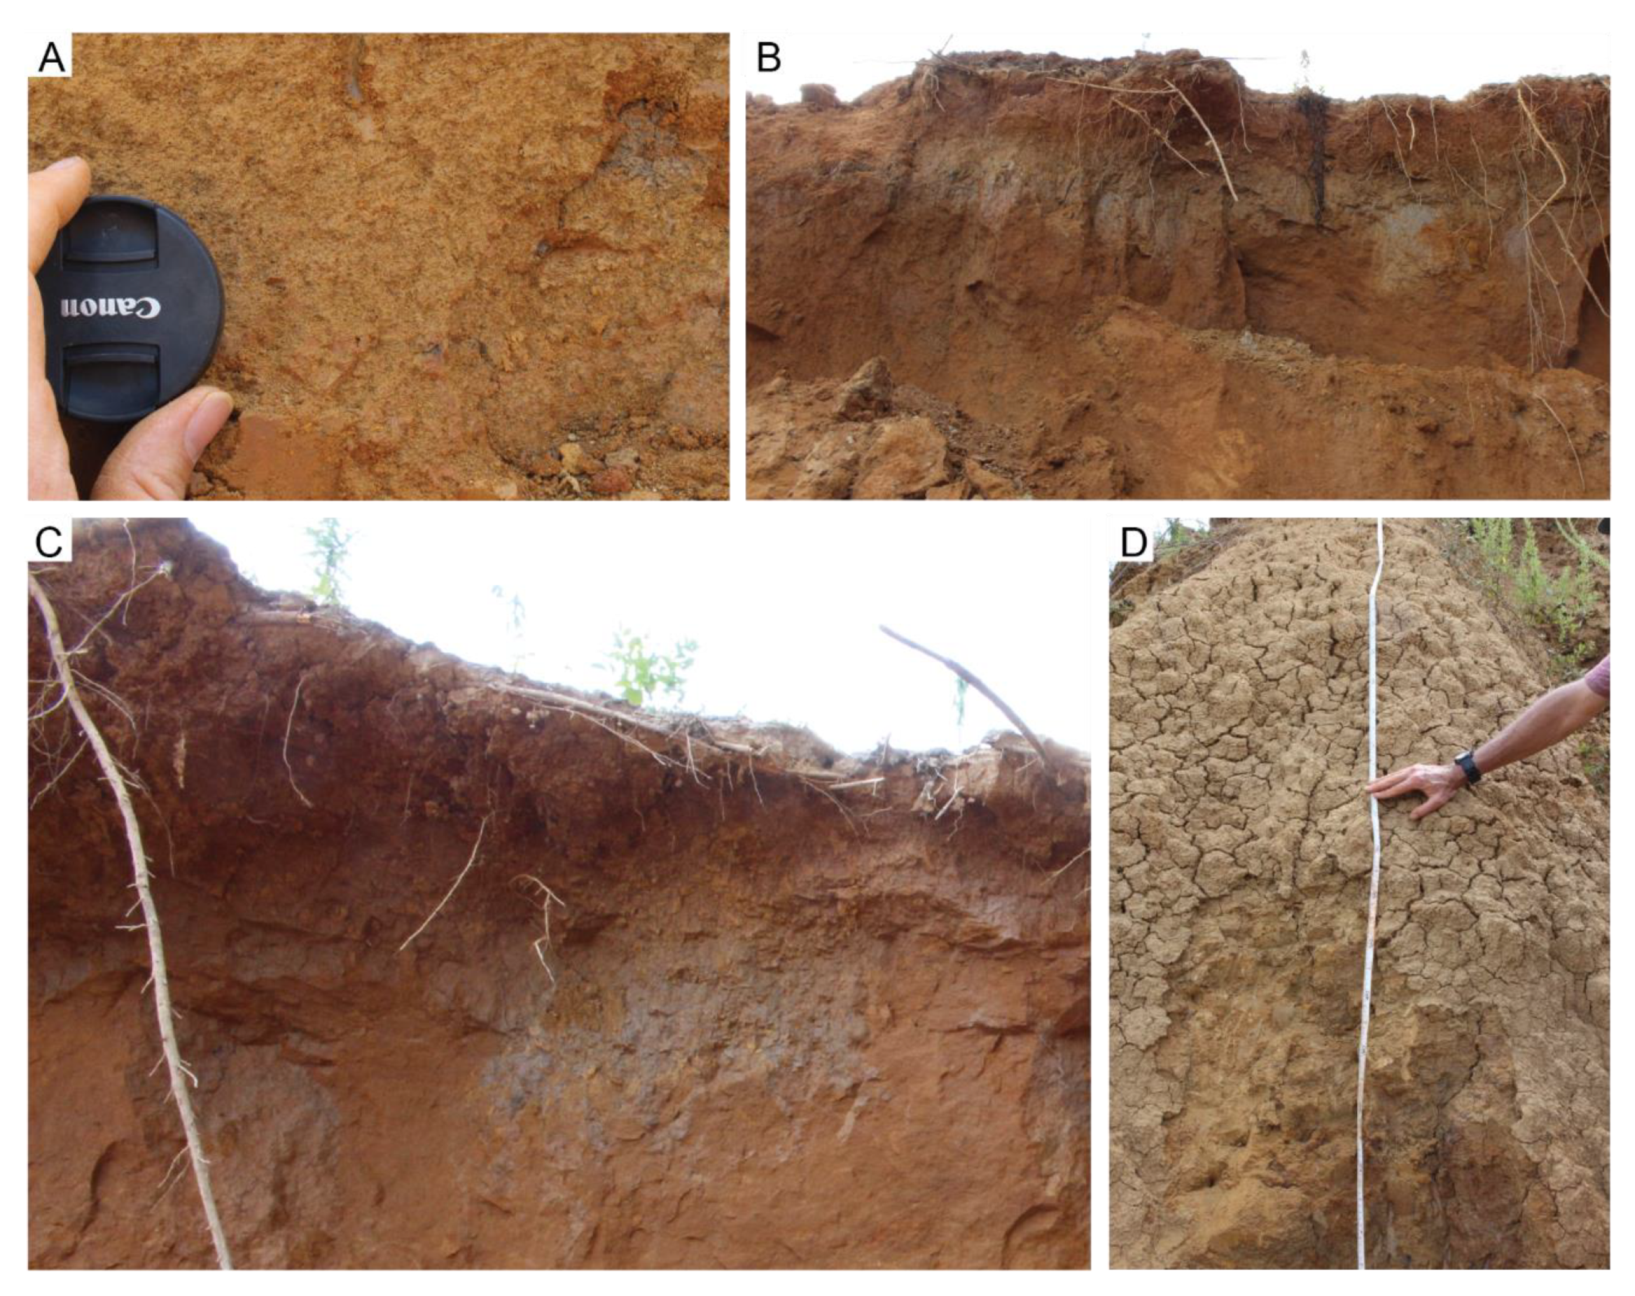 Geosciences | Free Full-Text | Detrital Zircon Provenance and Lithofacies  Associations of Montmorillonitic Sands in the Maastrichtian Ripley  Formation: Implications for Mississippi Embayment Paleodrainage Patterns  and Paleogeography | HTML